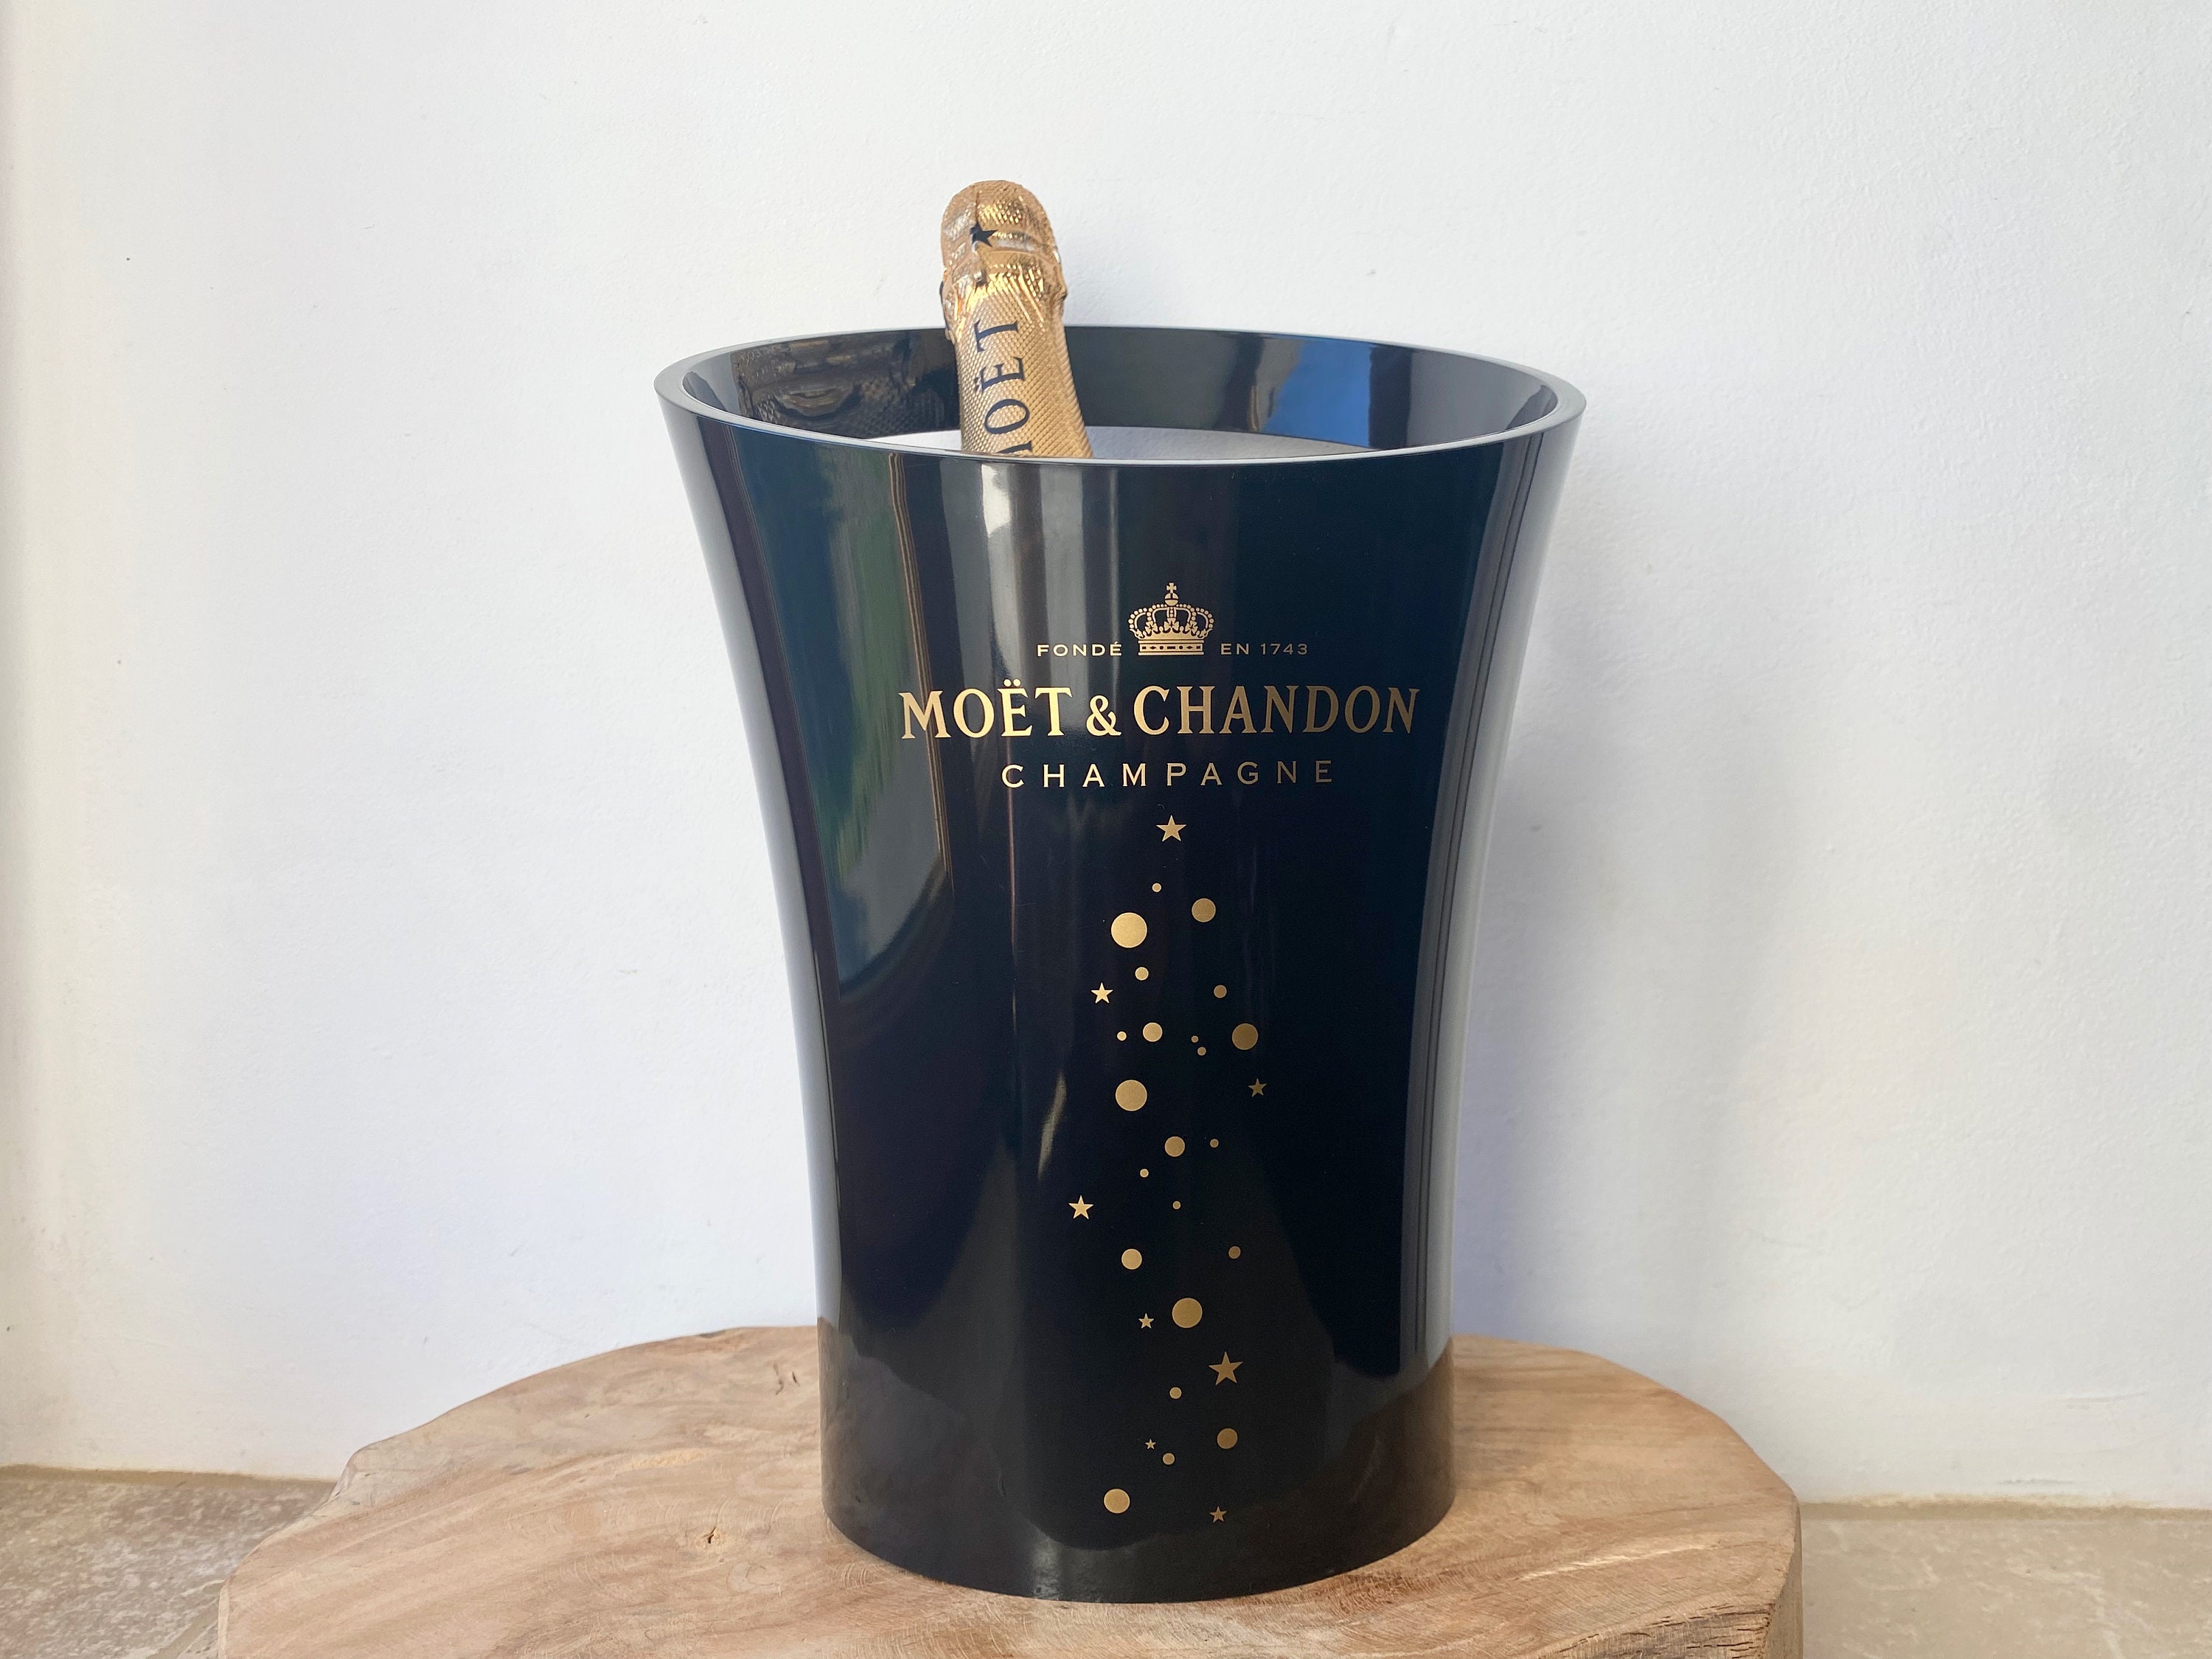  Moët & Chandon Ice Impérial Champagne Ice Bucket